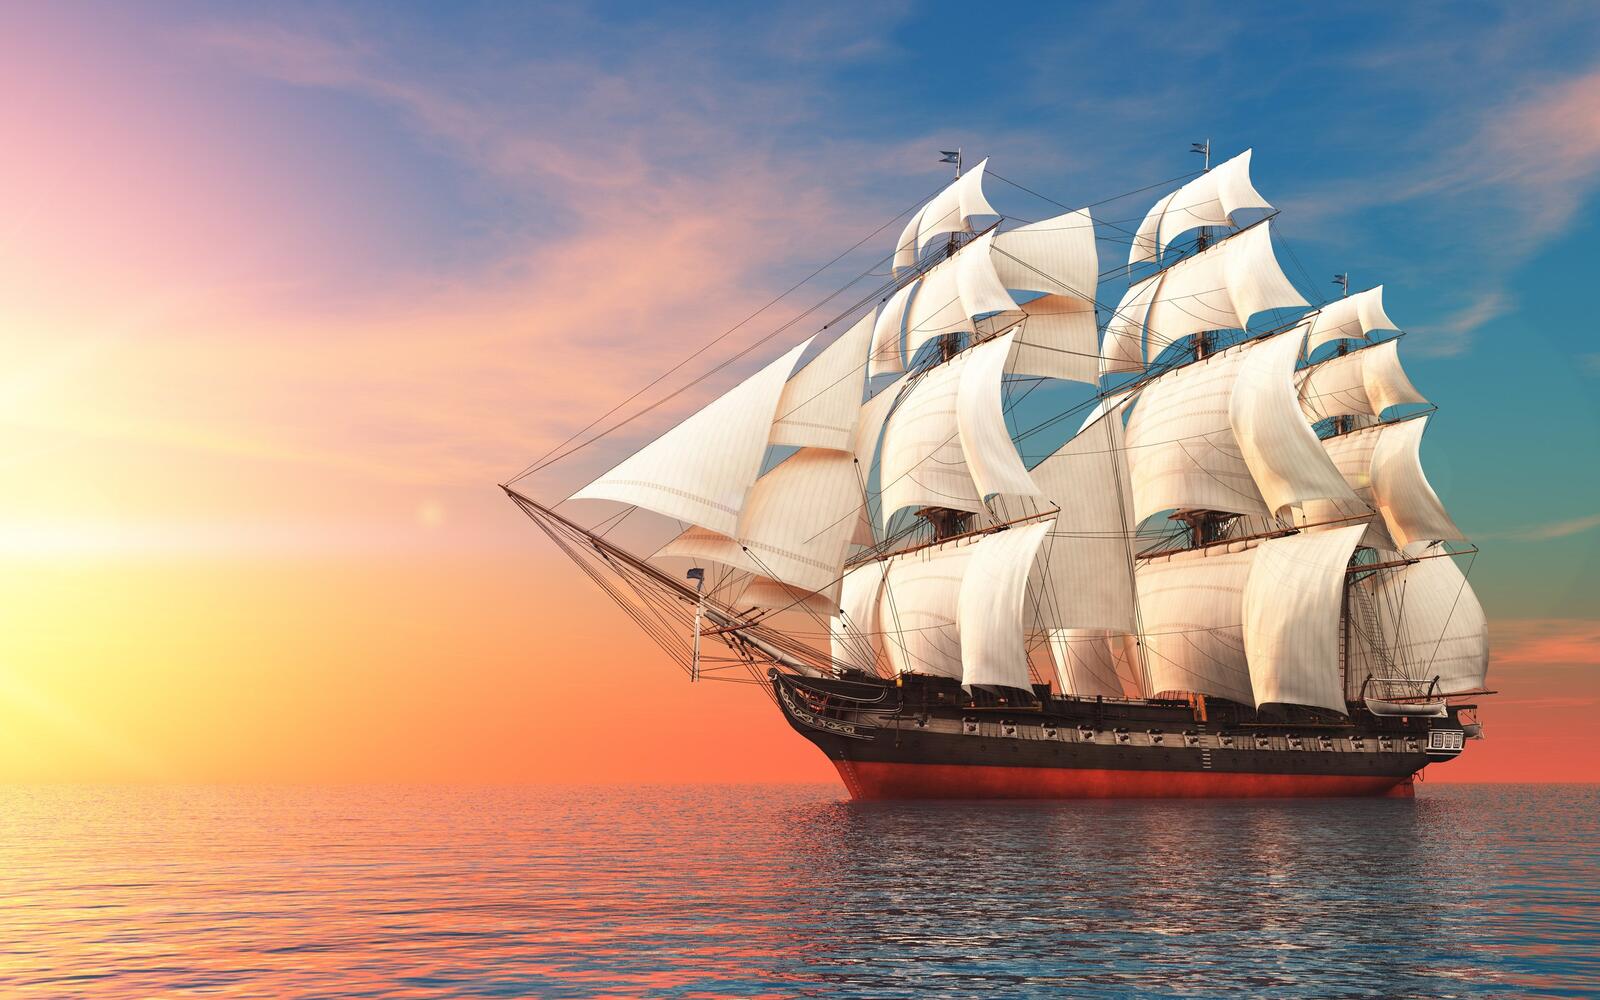 Free photo A big ship with white sails at sunset.